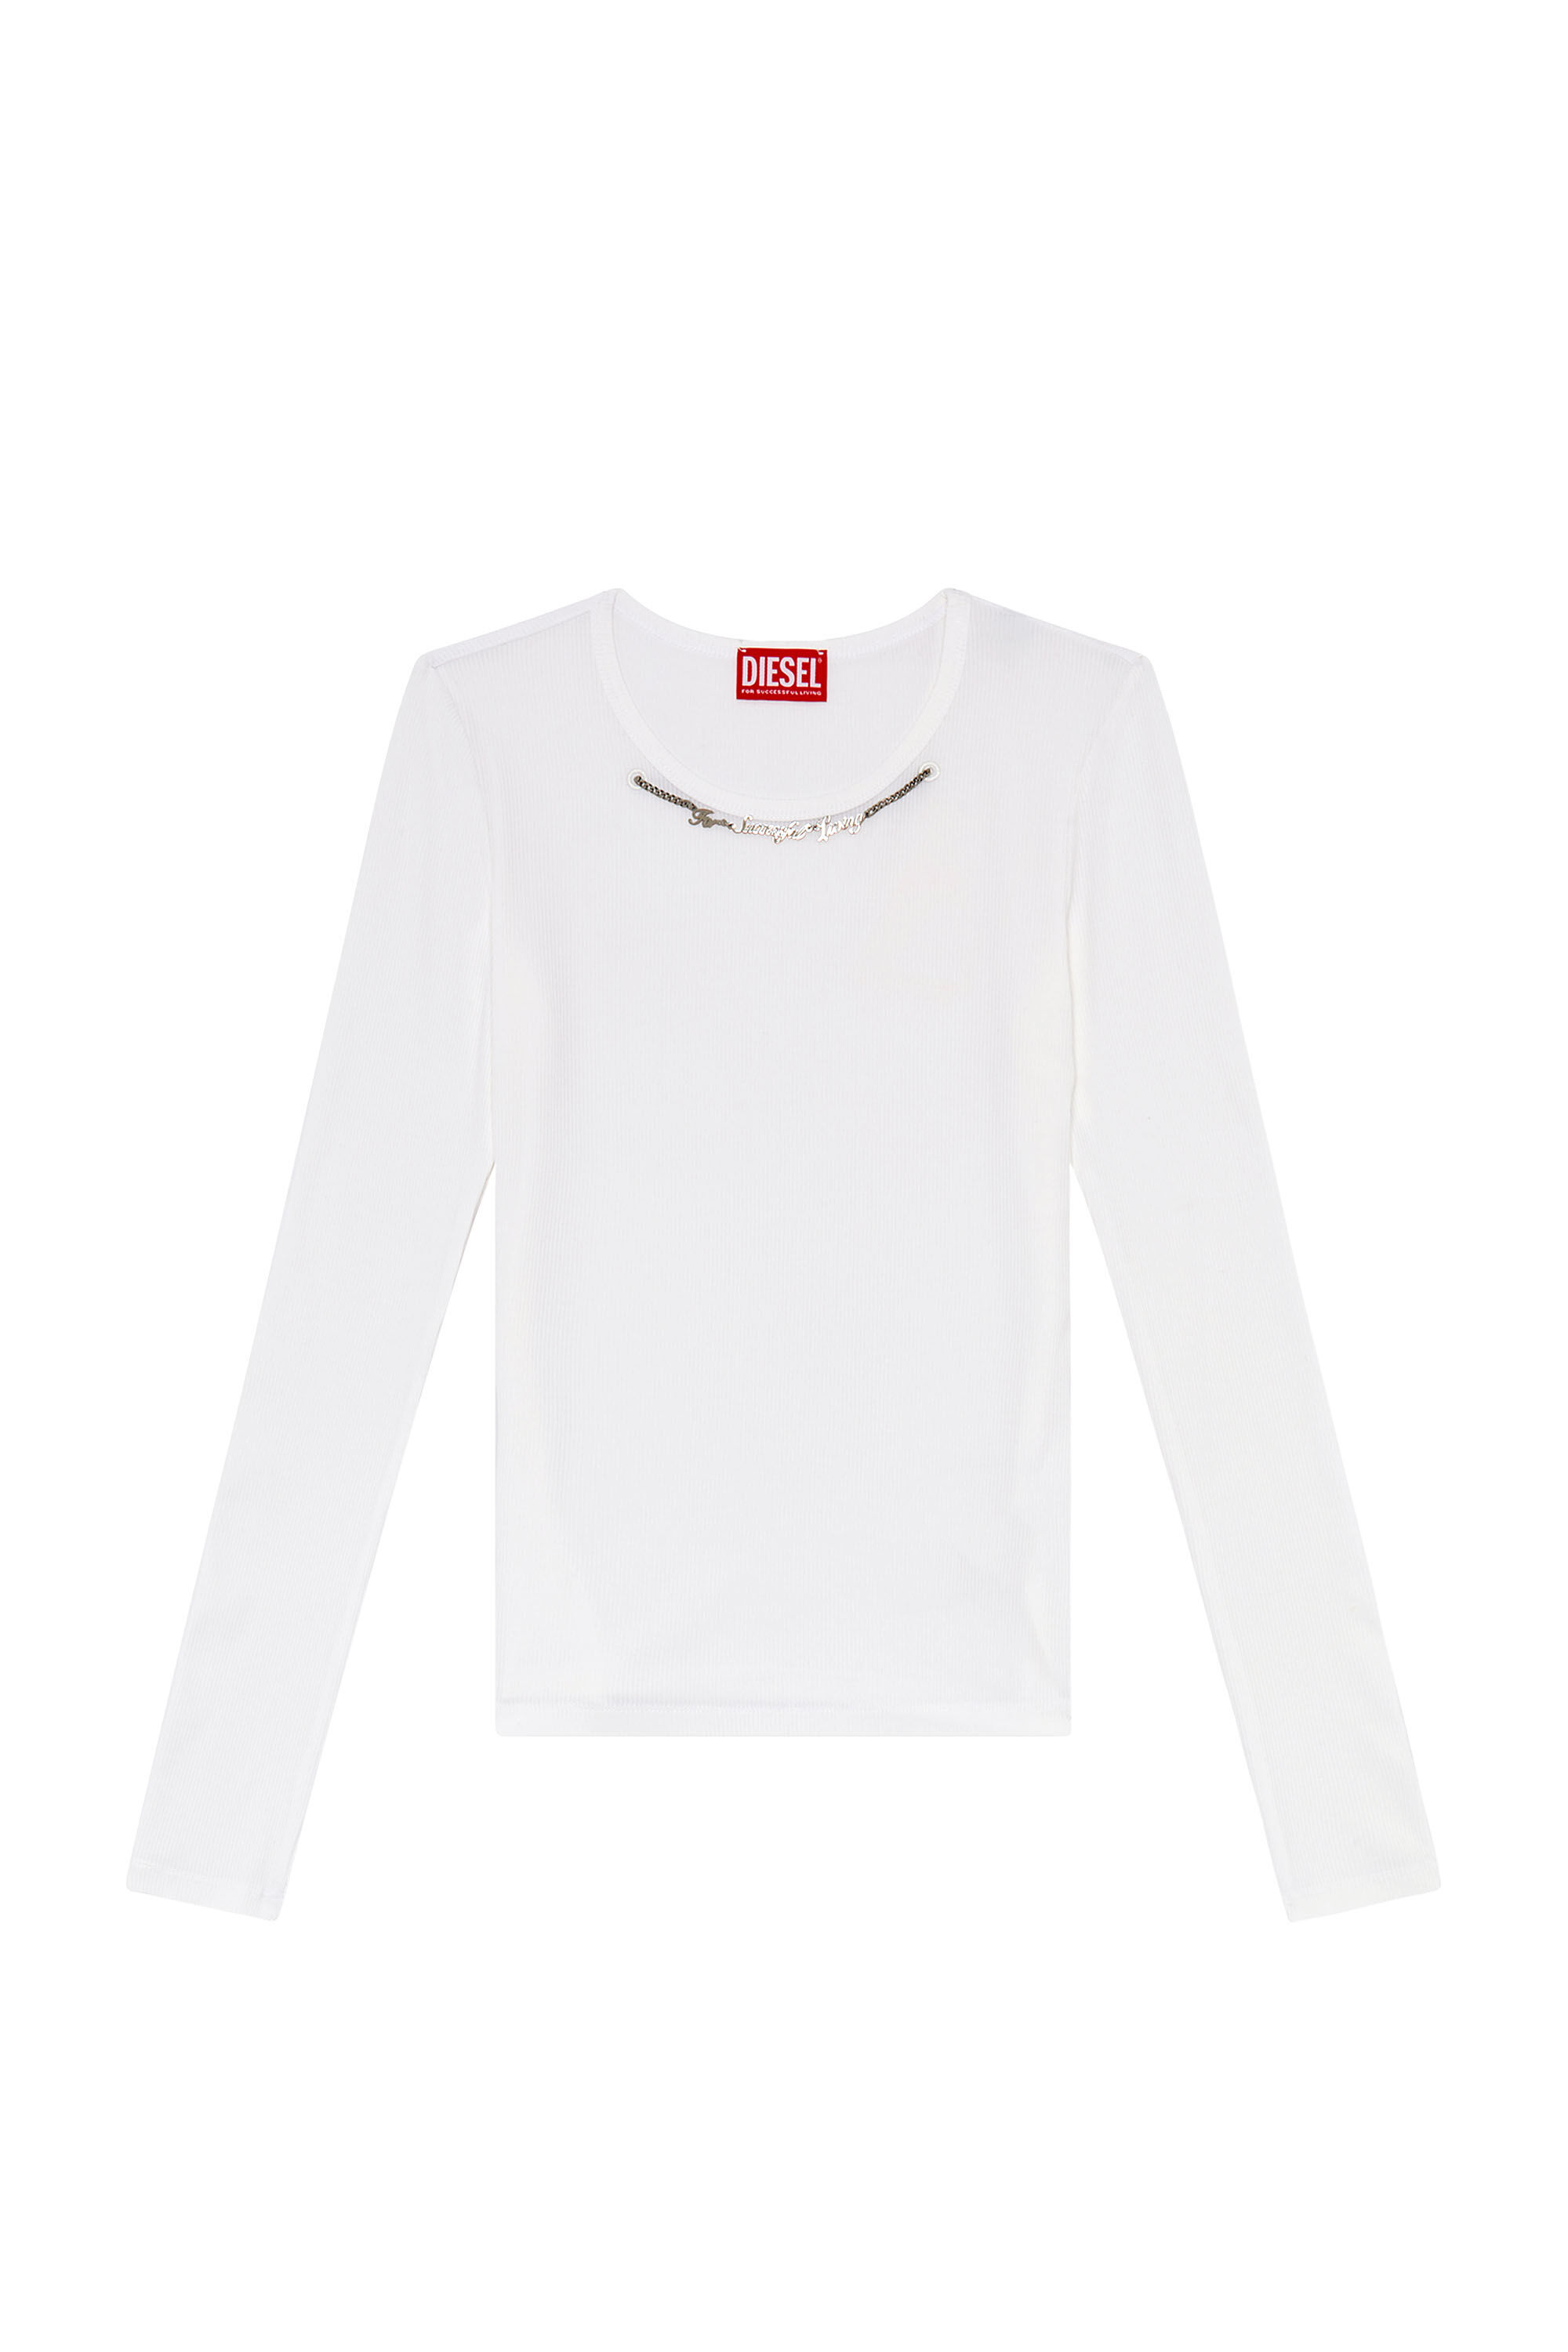 Diesel - T-MATIC-LS, Woman Long-sleeve top with chain necklace in White - Image 2